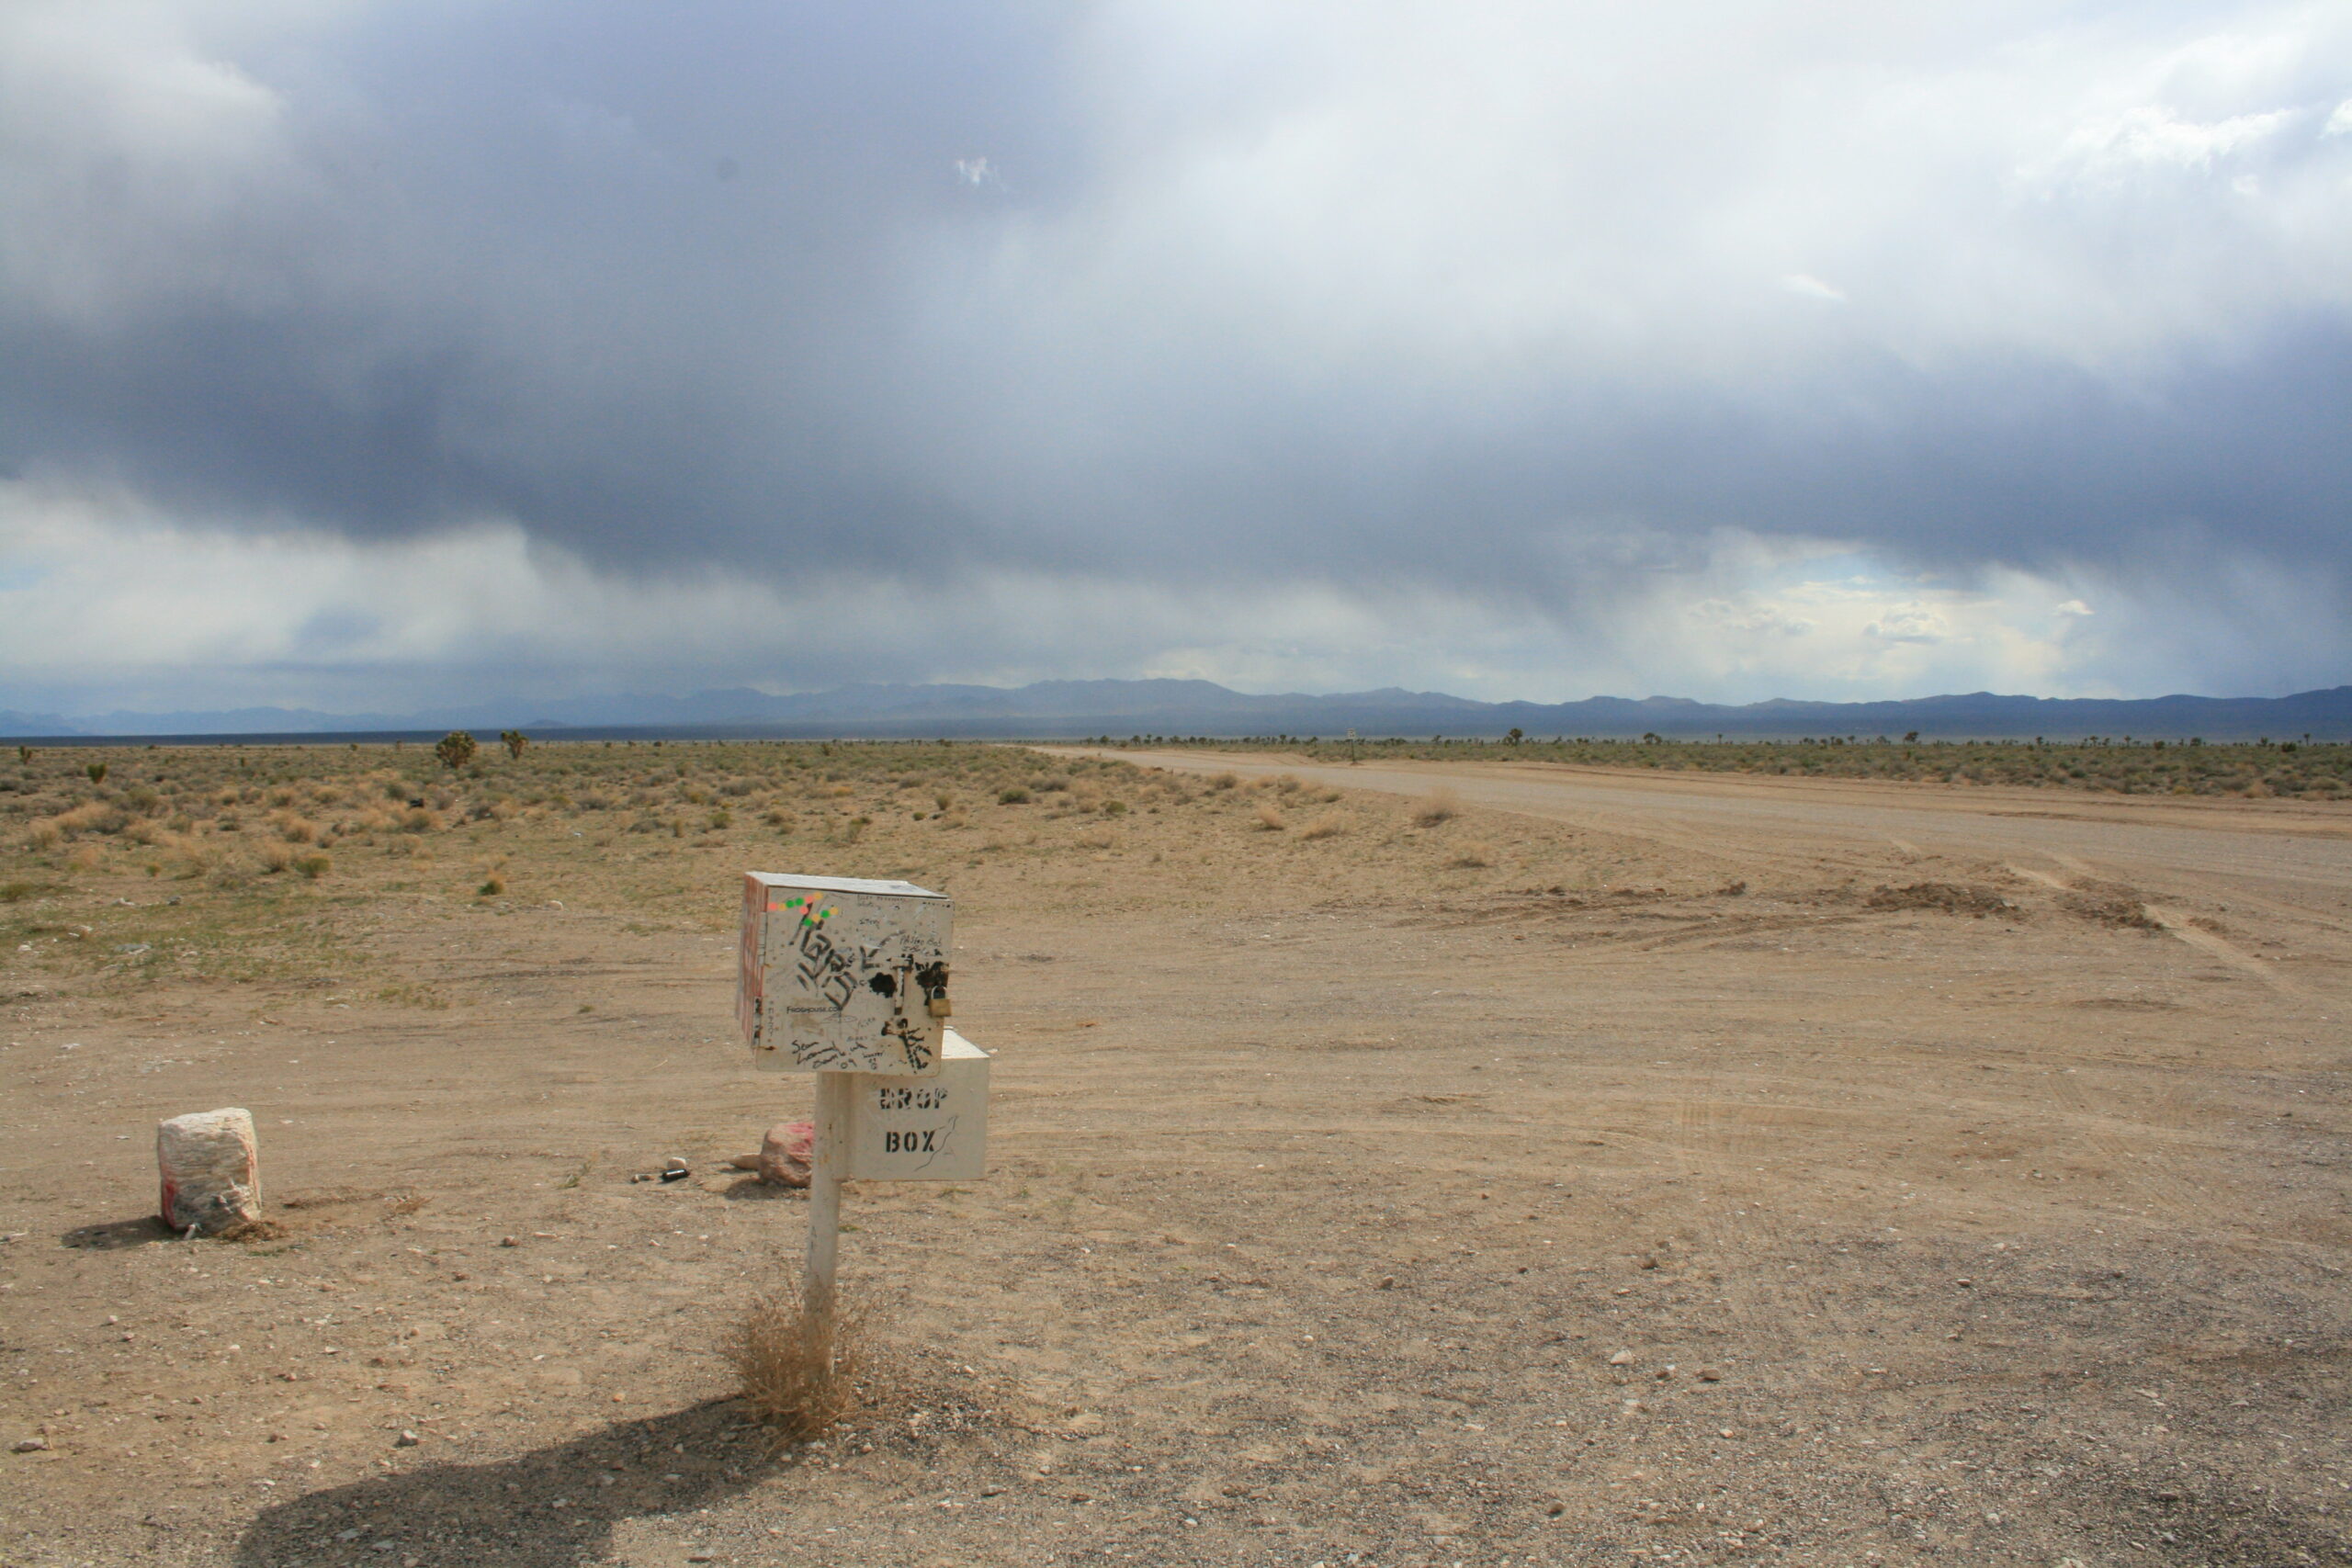 The famous Black Mailbox (now white) sits adjacent to a dirt road leading to the boundary of Area 51.